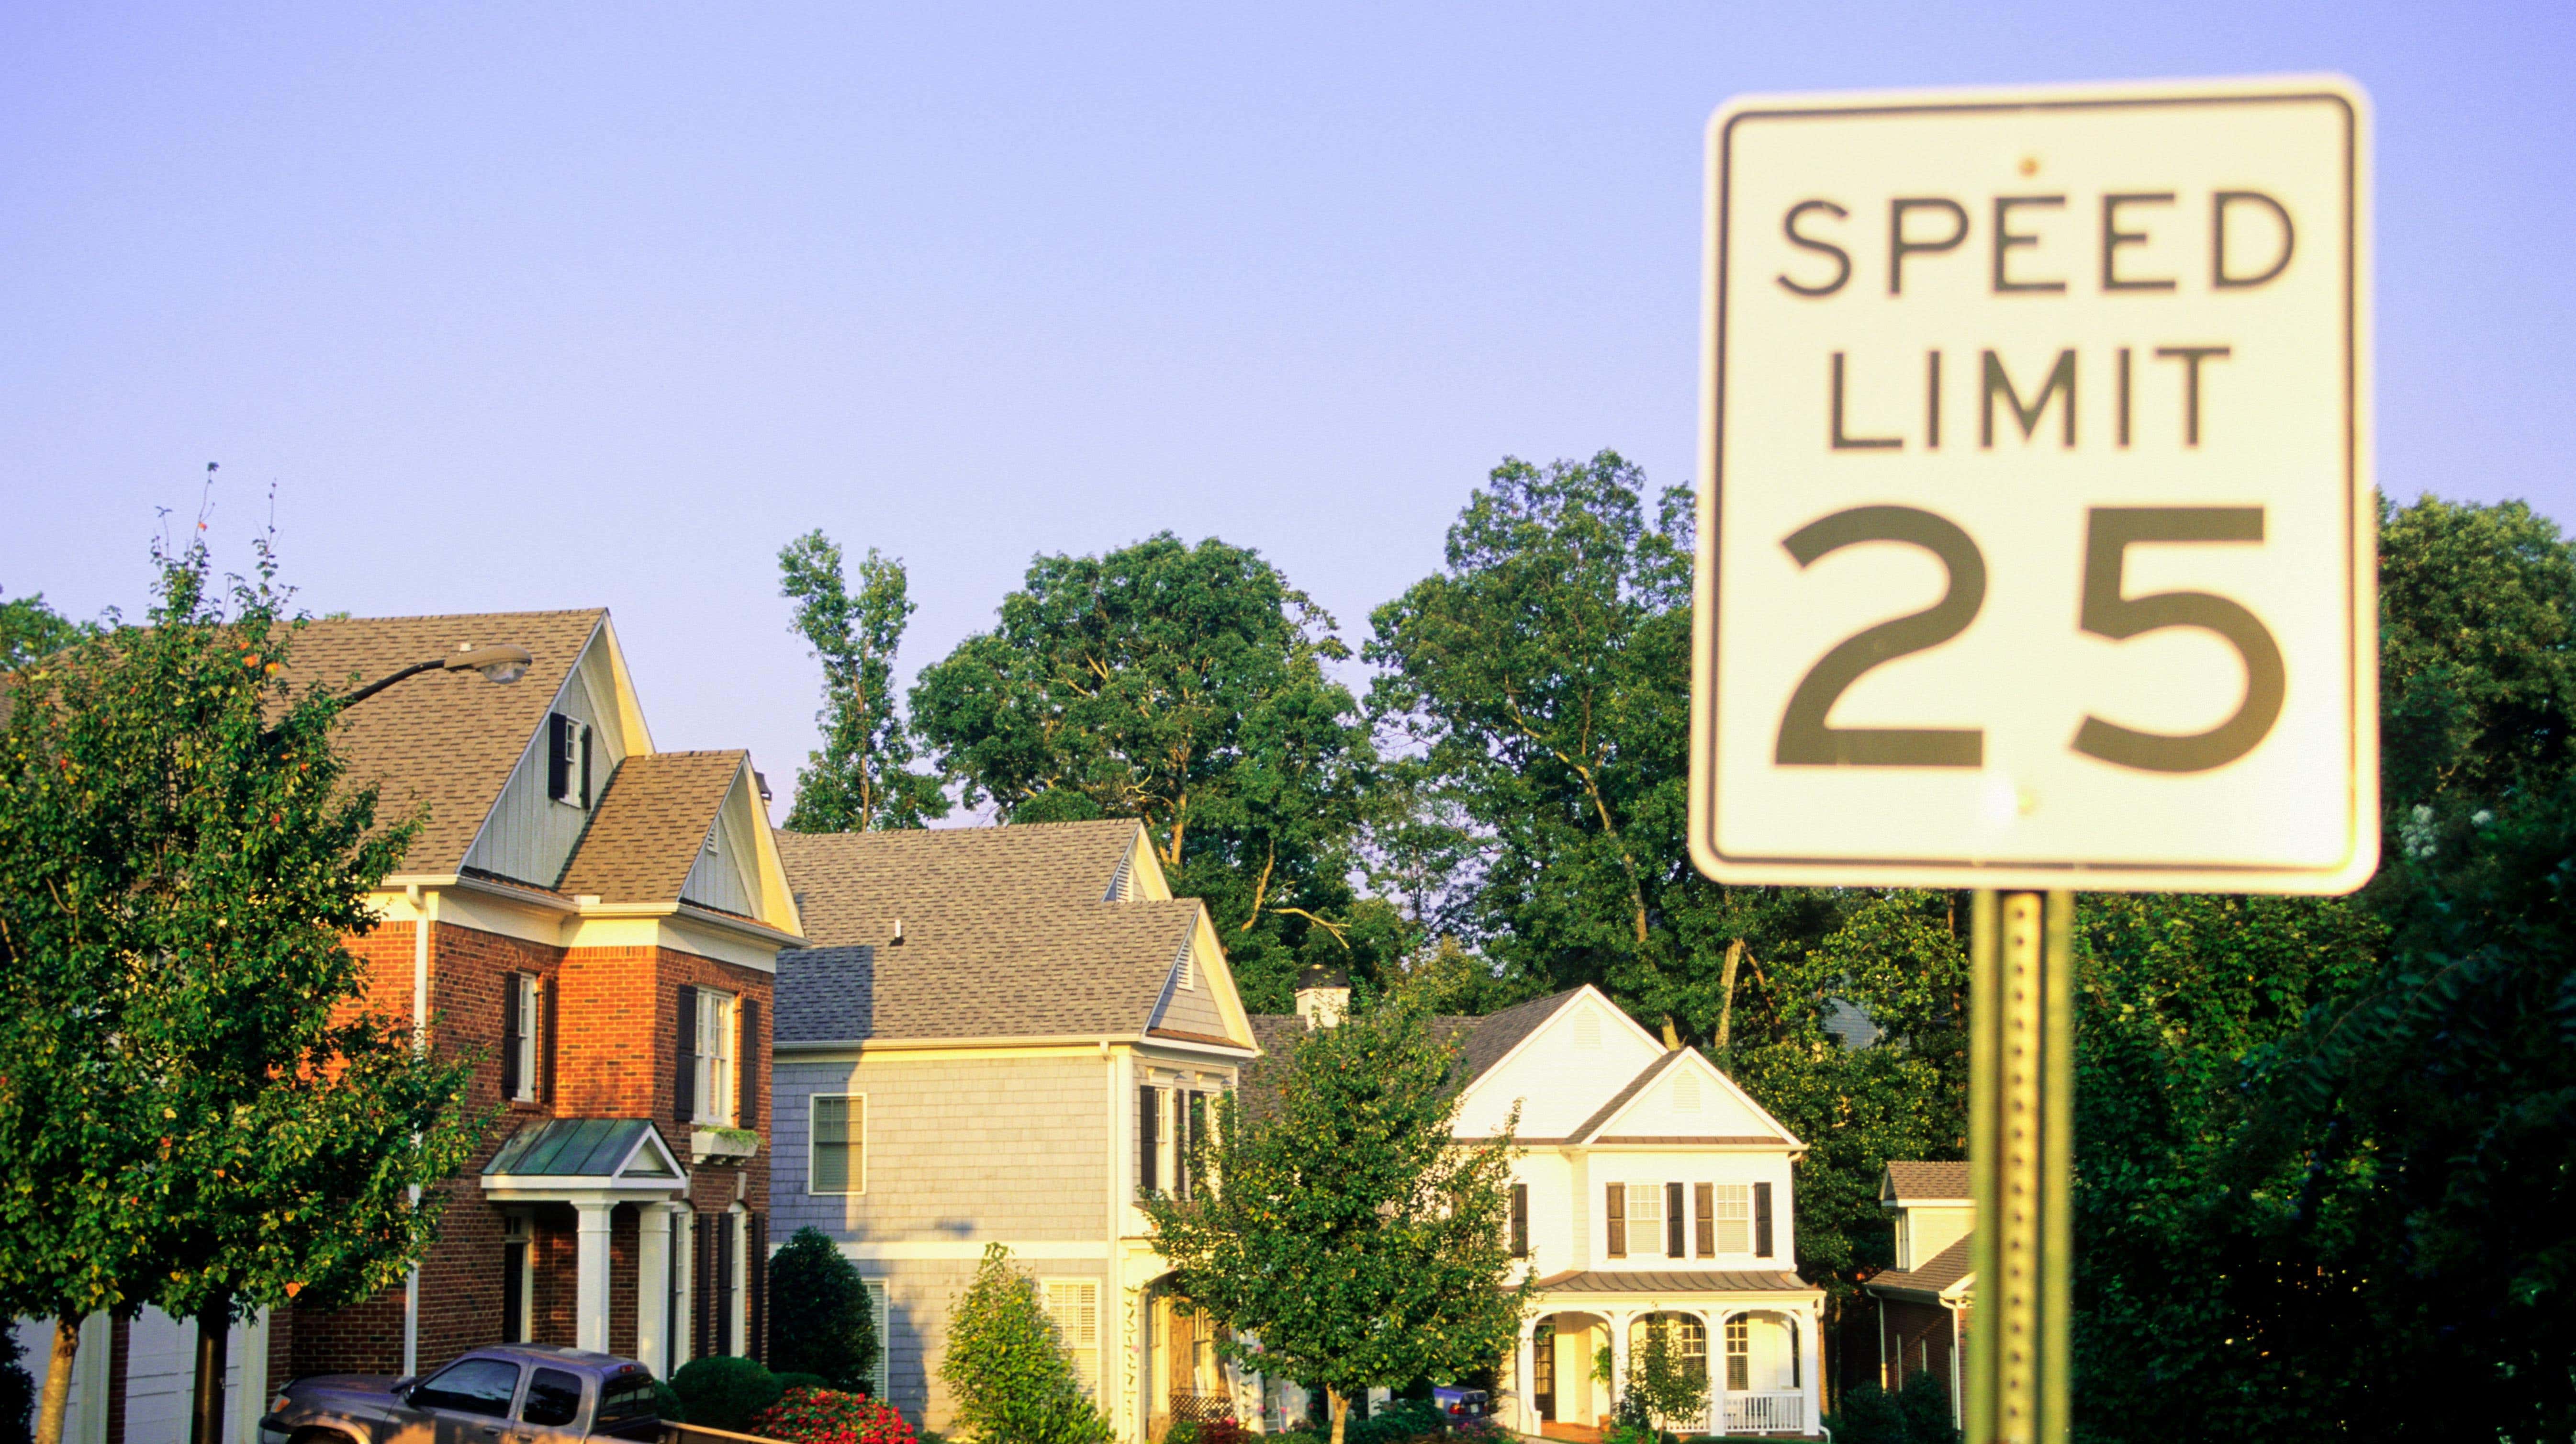 25 mph speed limit signs in the neighborhood